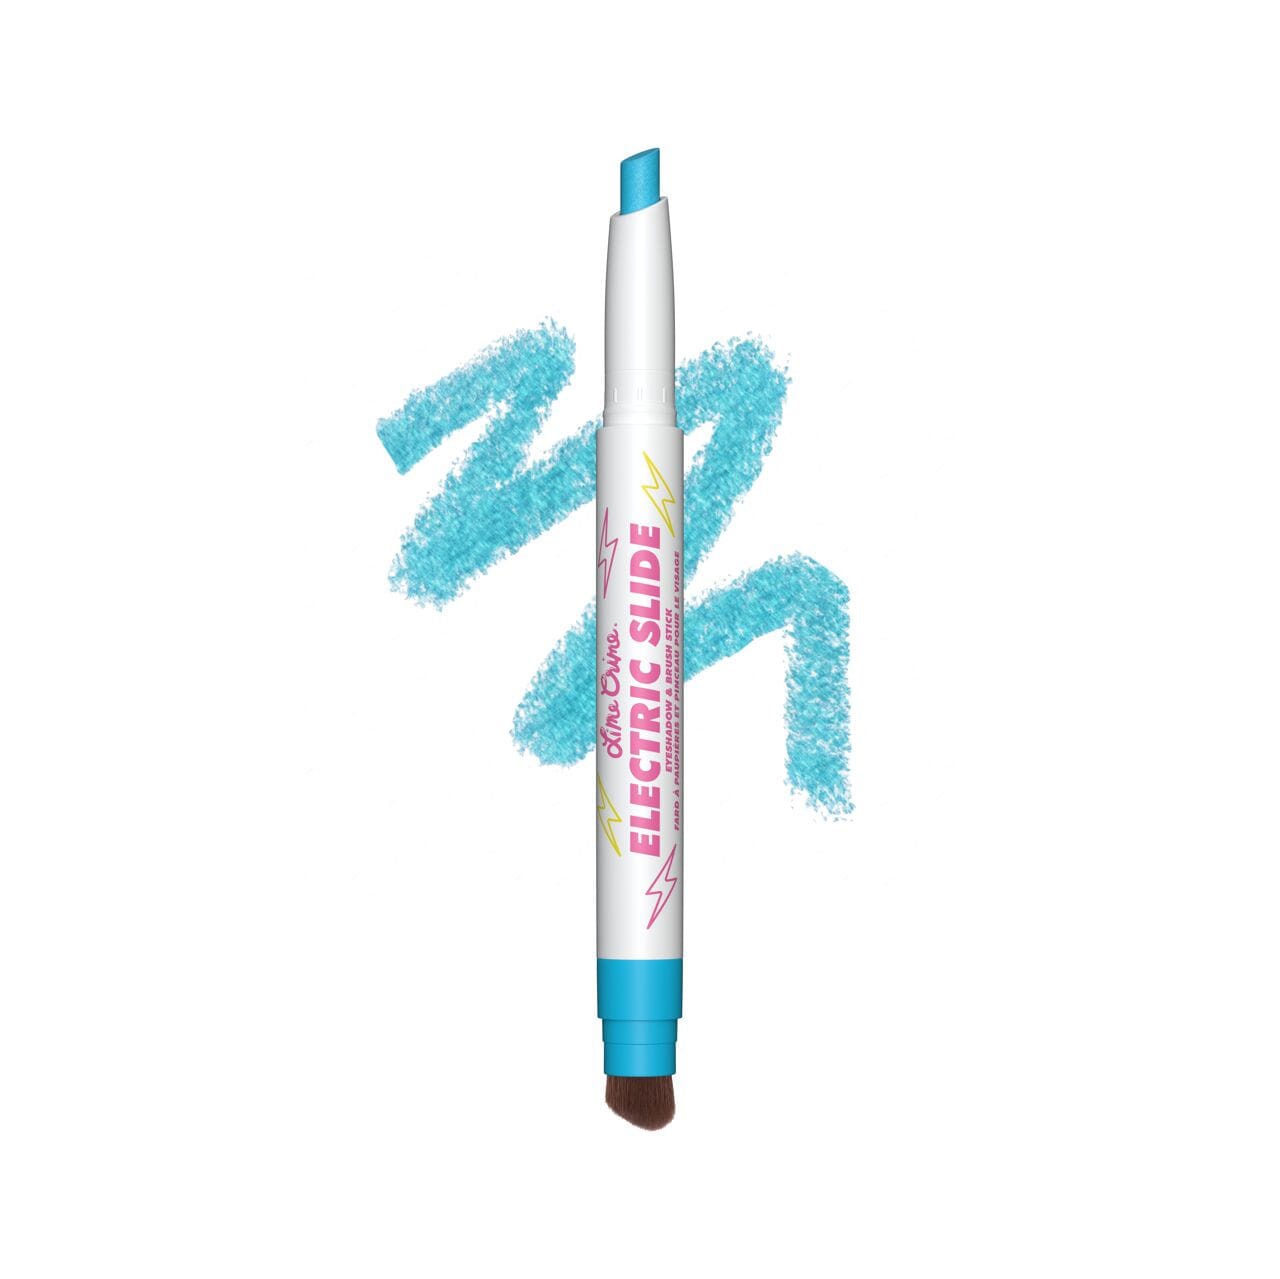 Electric Slide Eyeshadow & Smudge Sticks variant:CHILL PILL